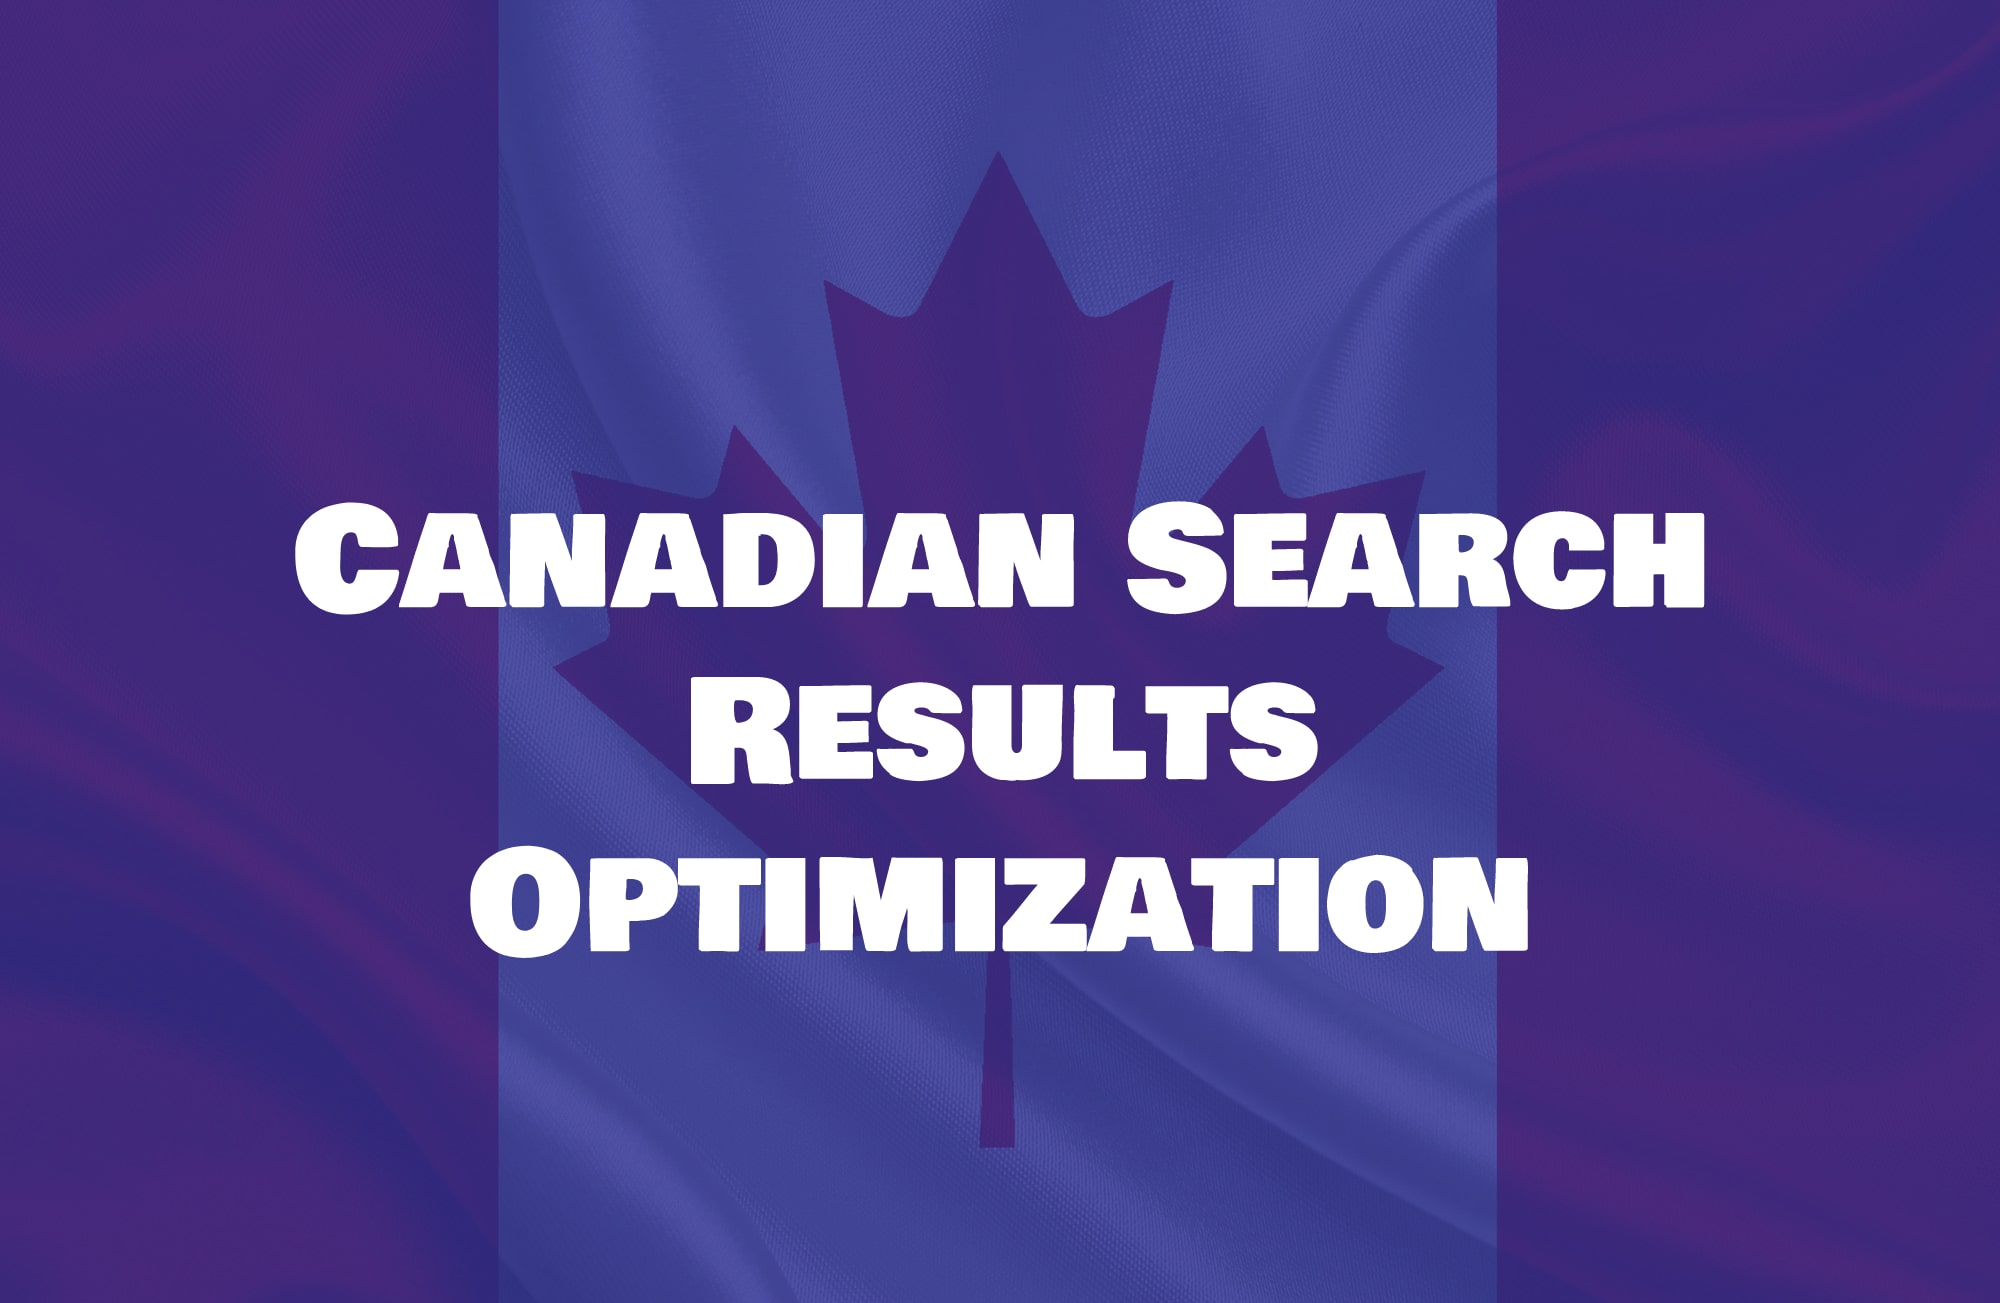 optimize website for Canadian search results